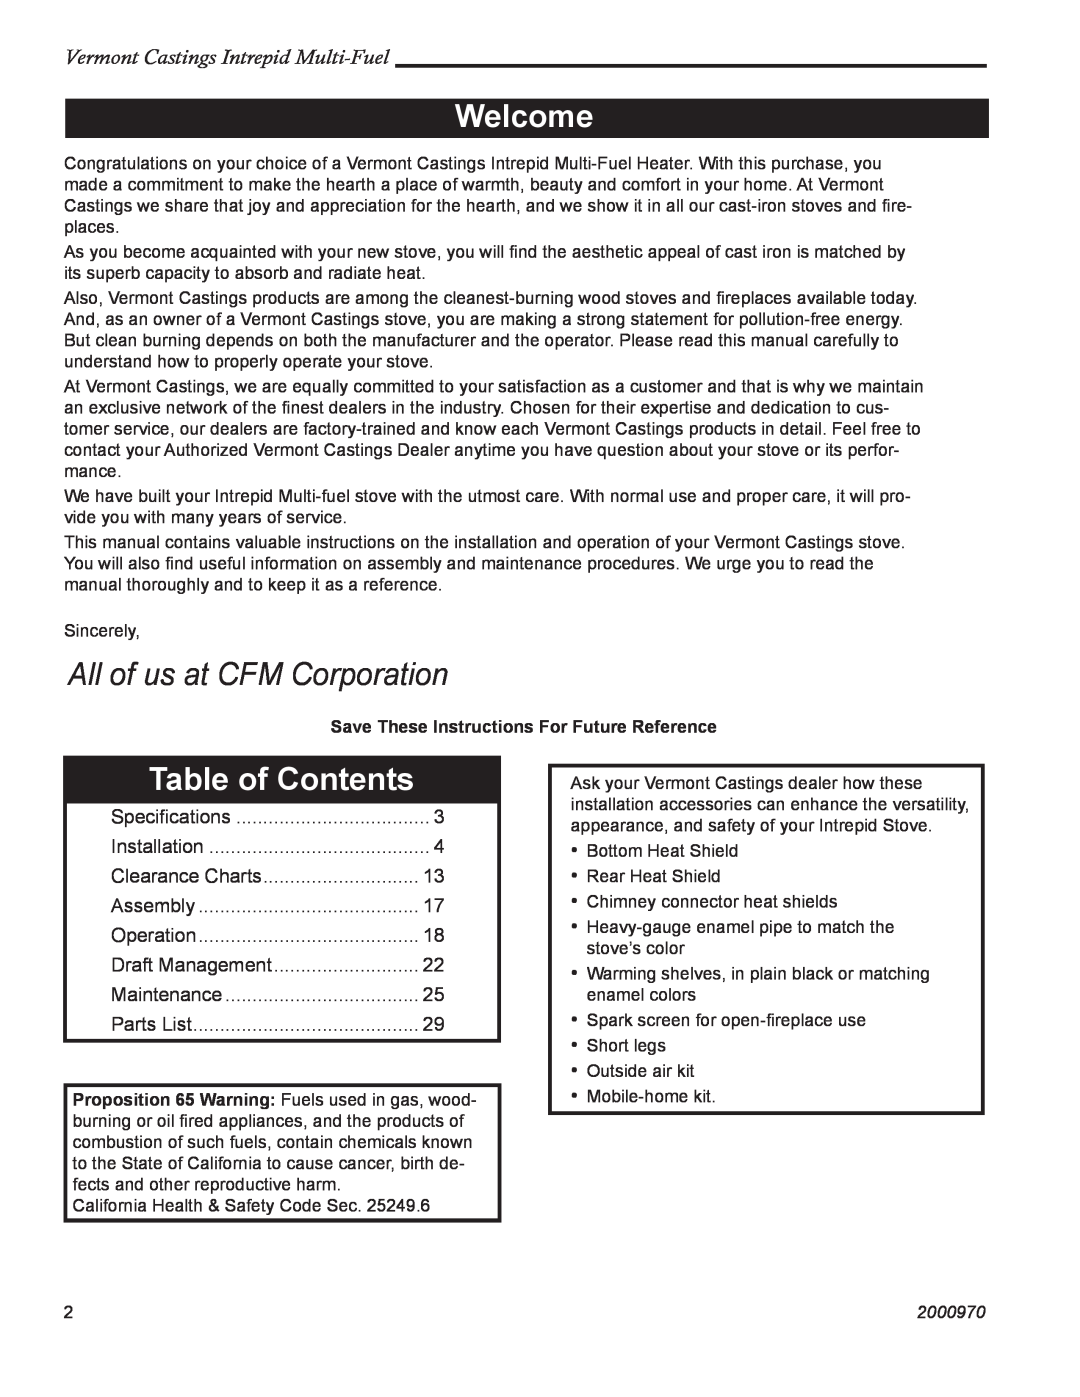 Vermont Casting 1695 Welcome, Table of Contents, Vermont Castings Intrepid Multi-Fuel, All of us at CFM Corporation 